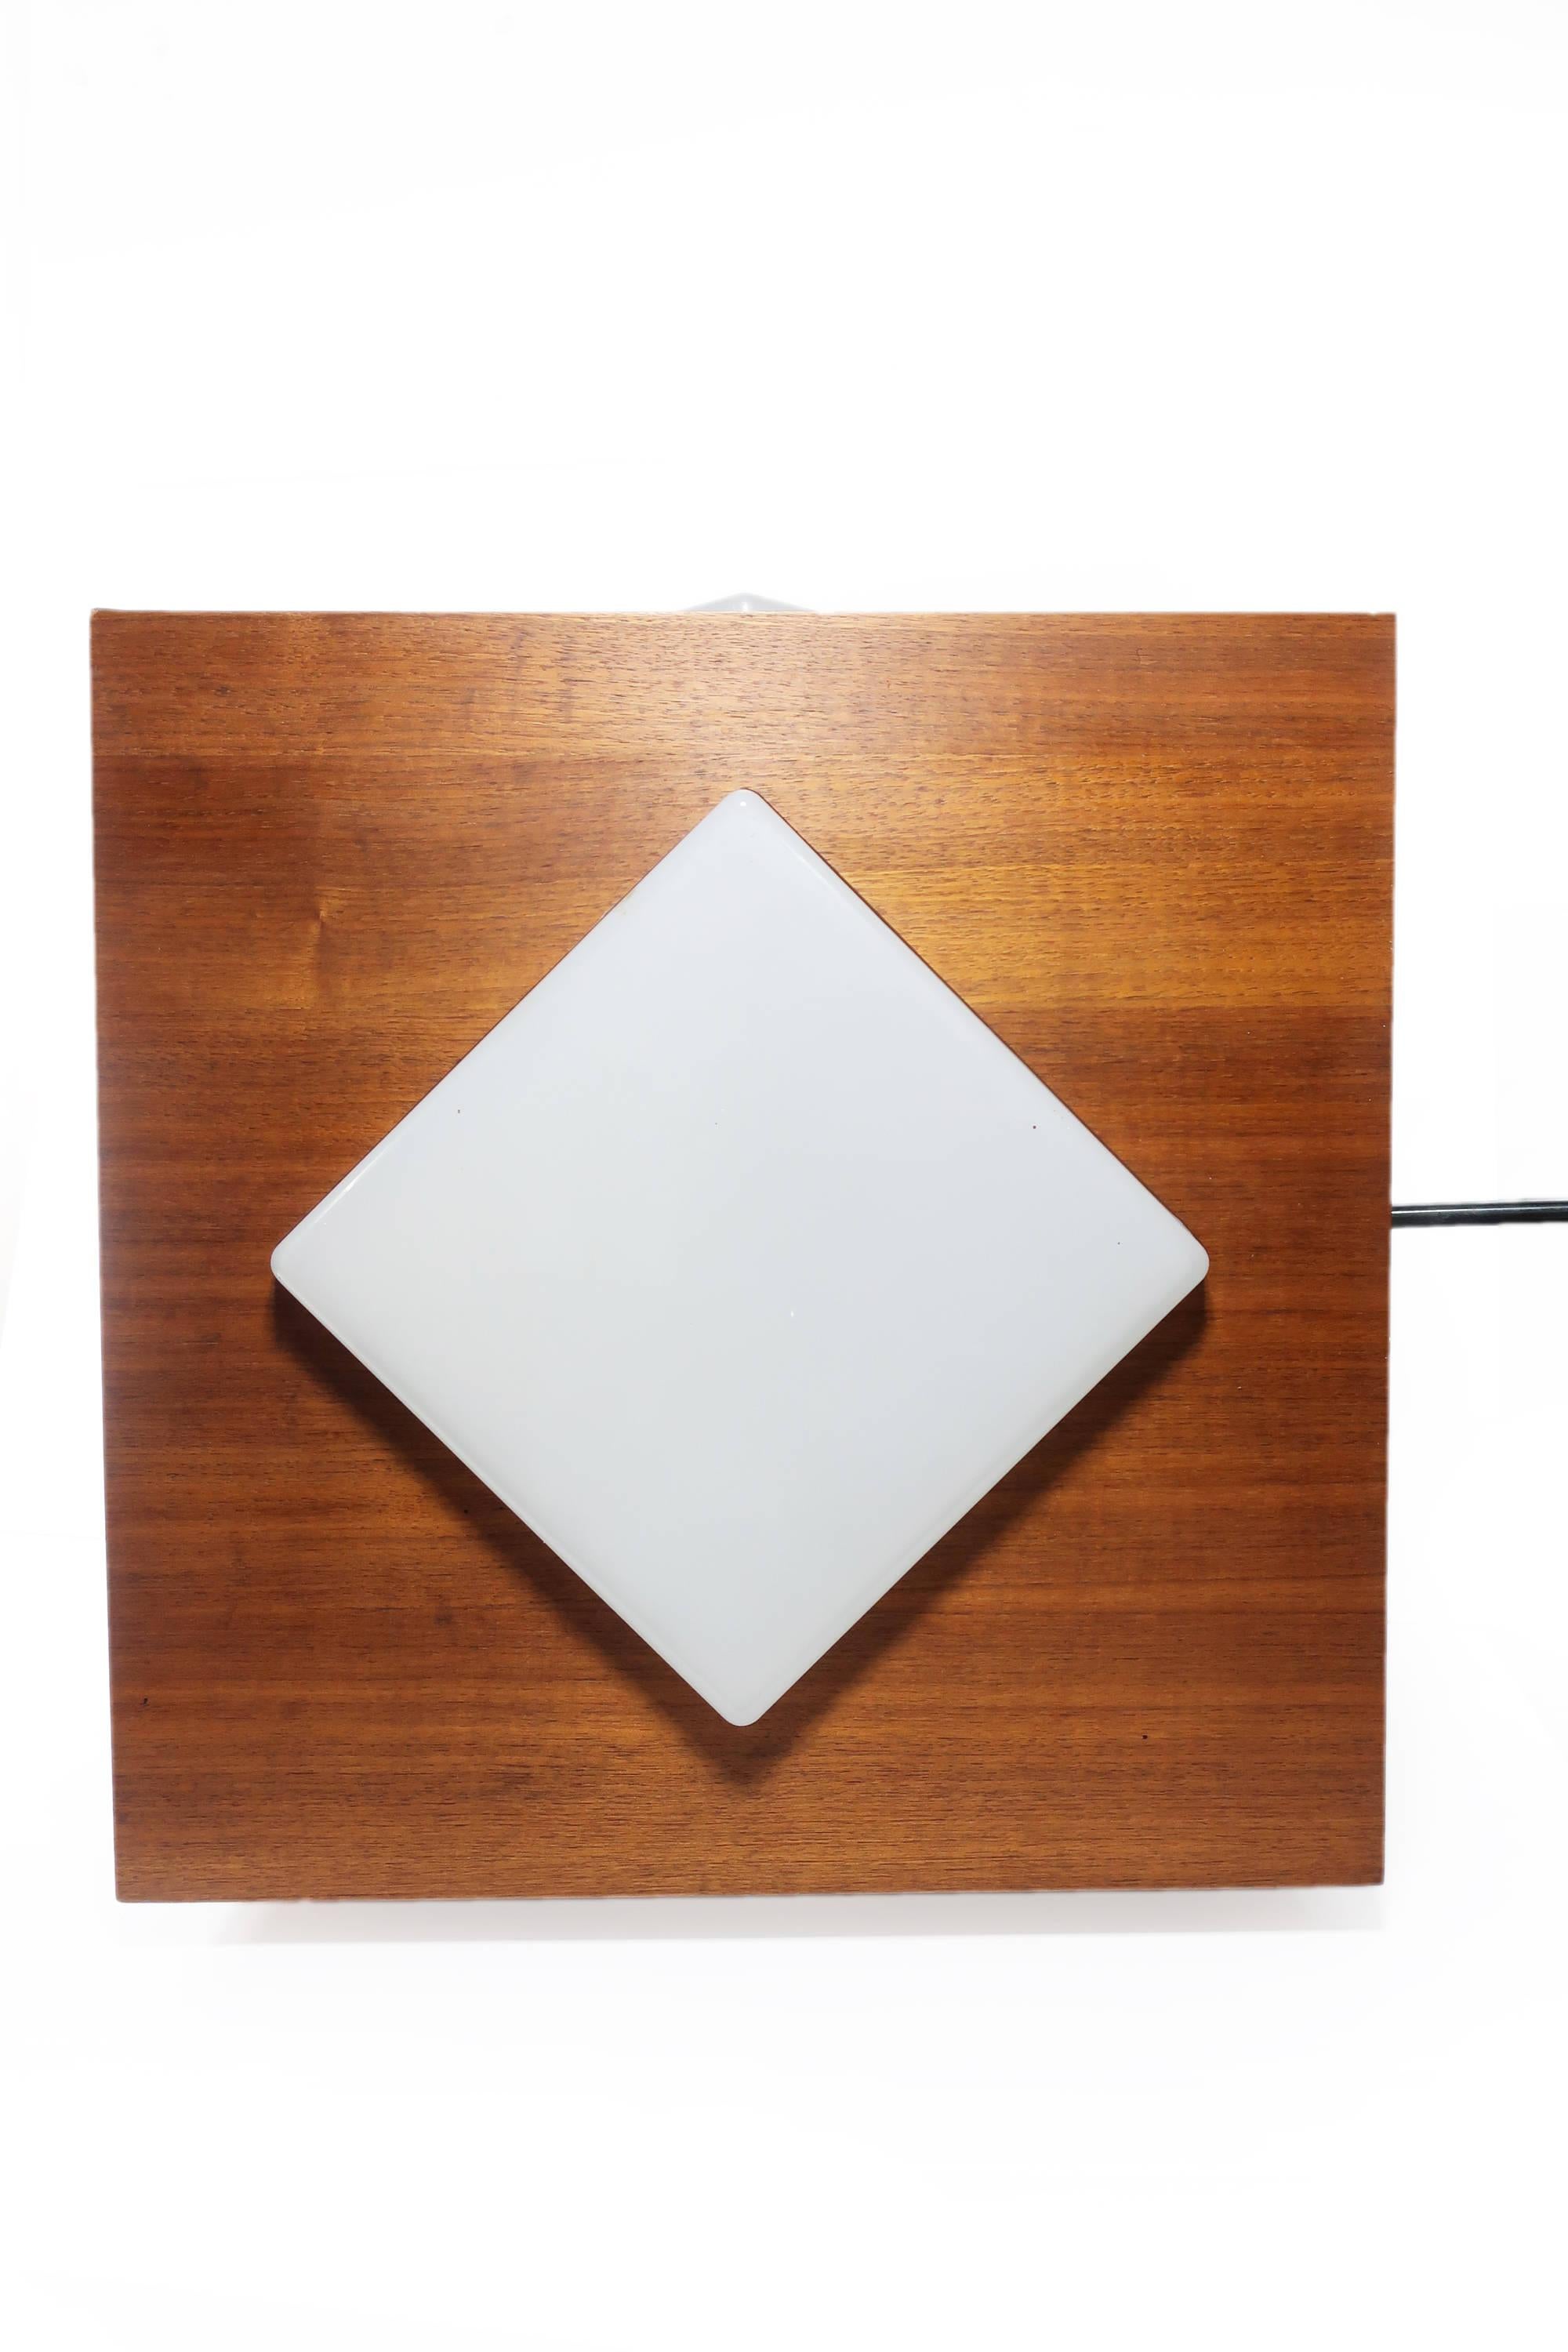 20th Century Midcentury Teak and Frosted Glass Pendant Light